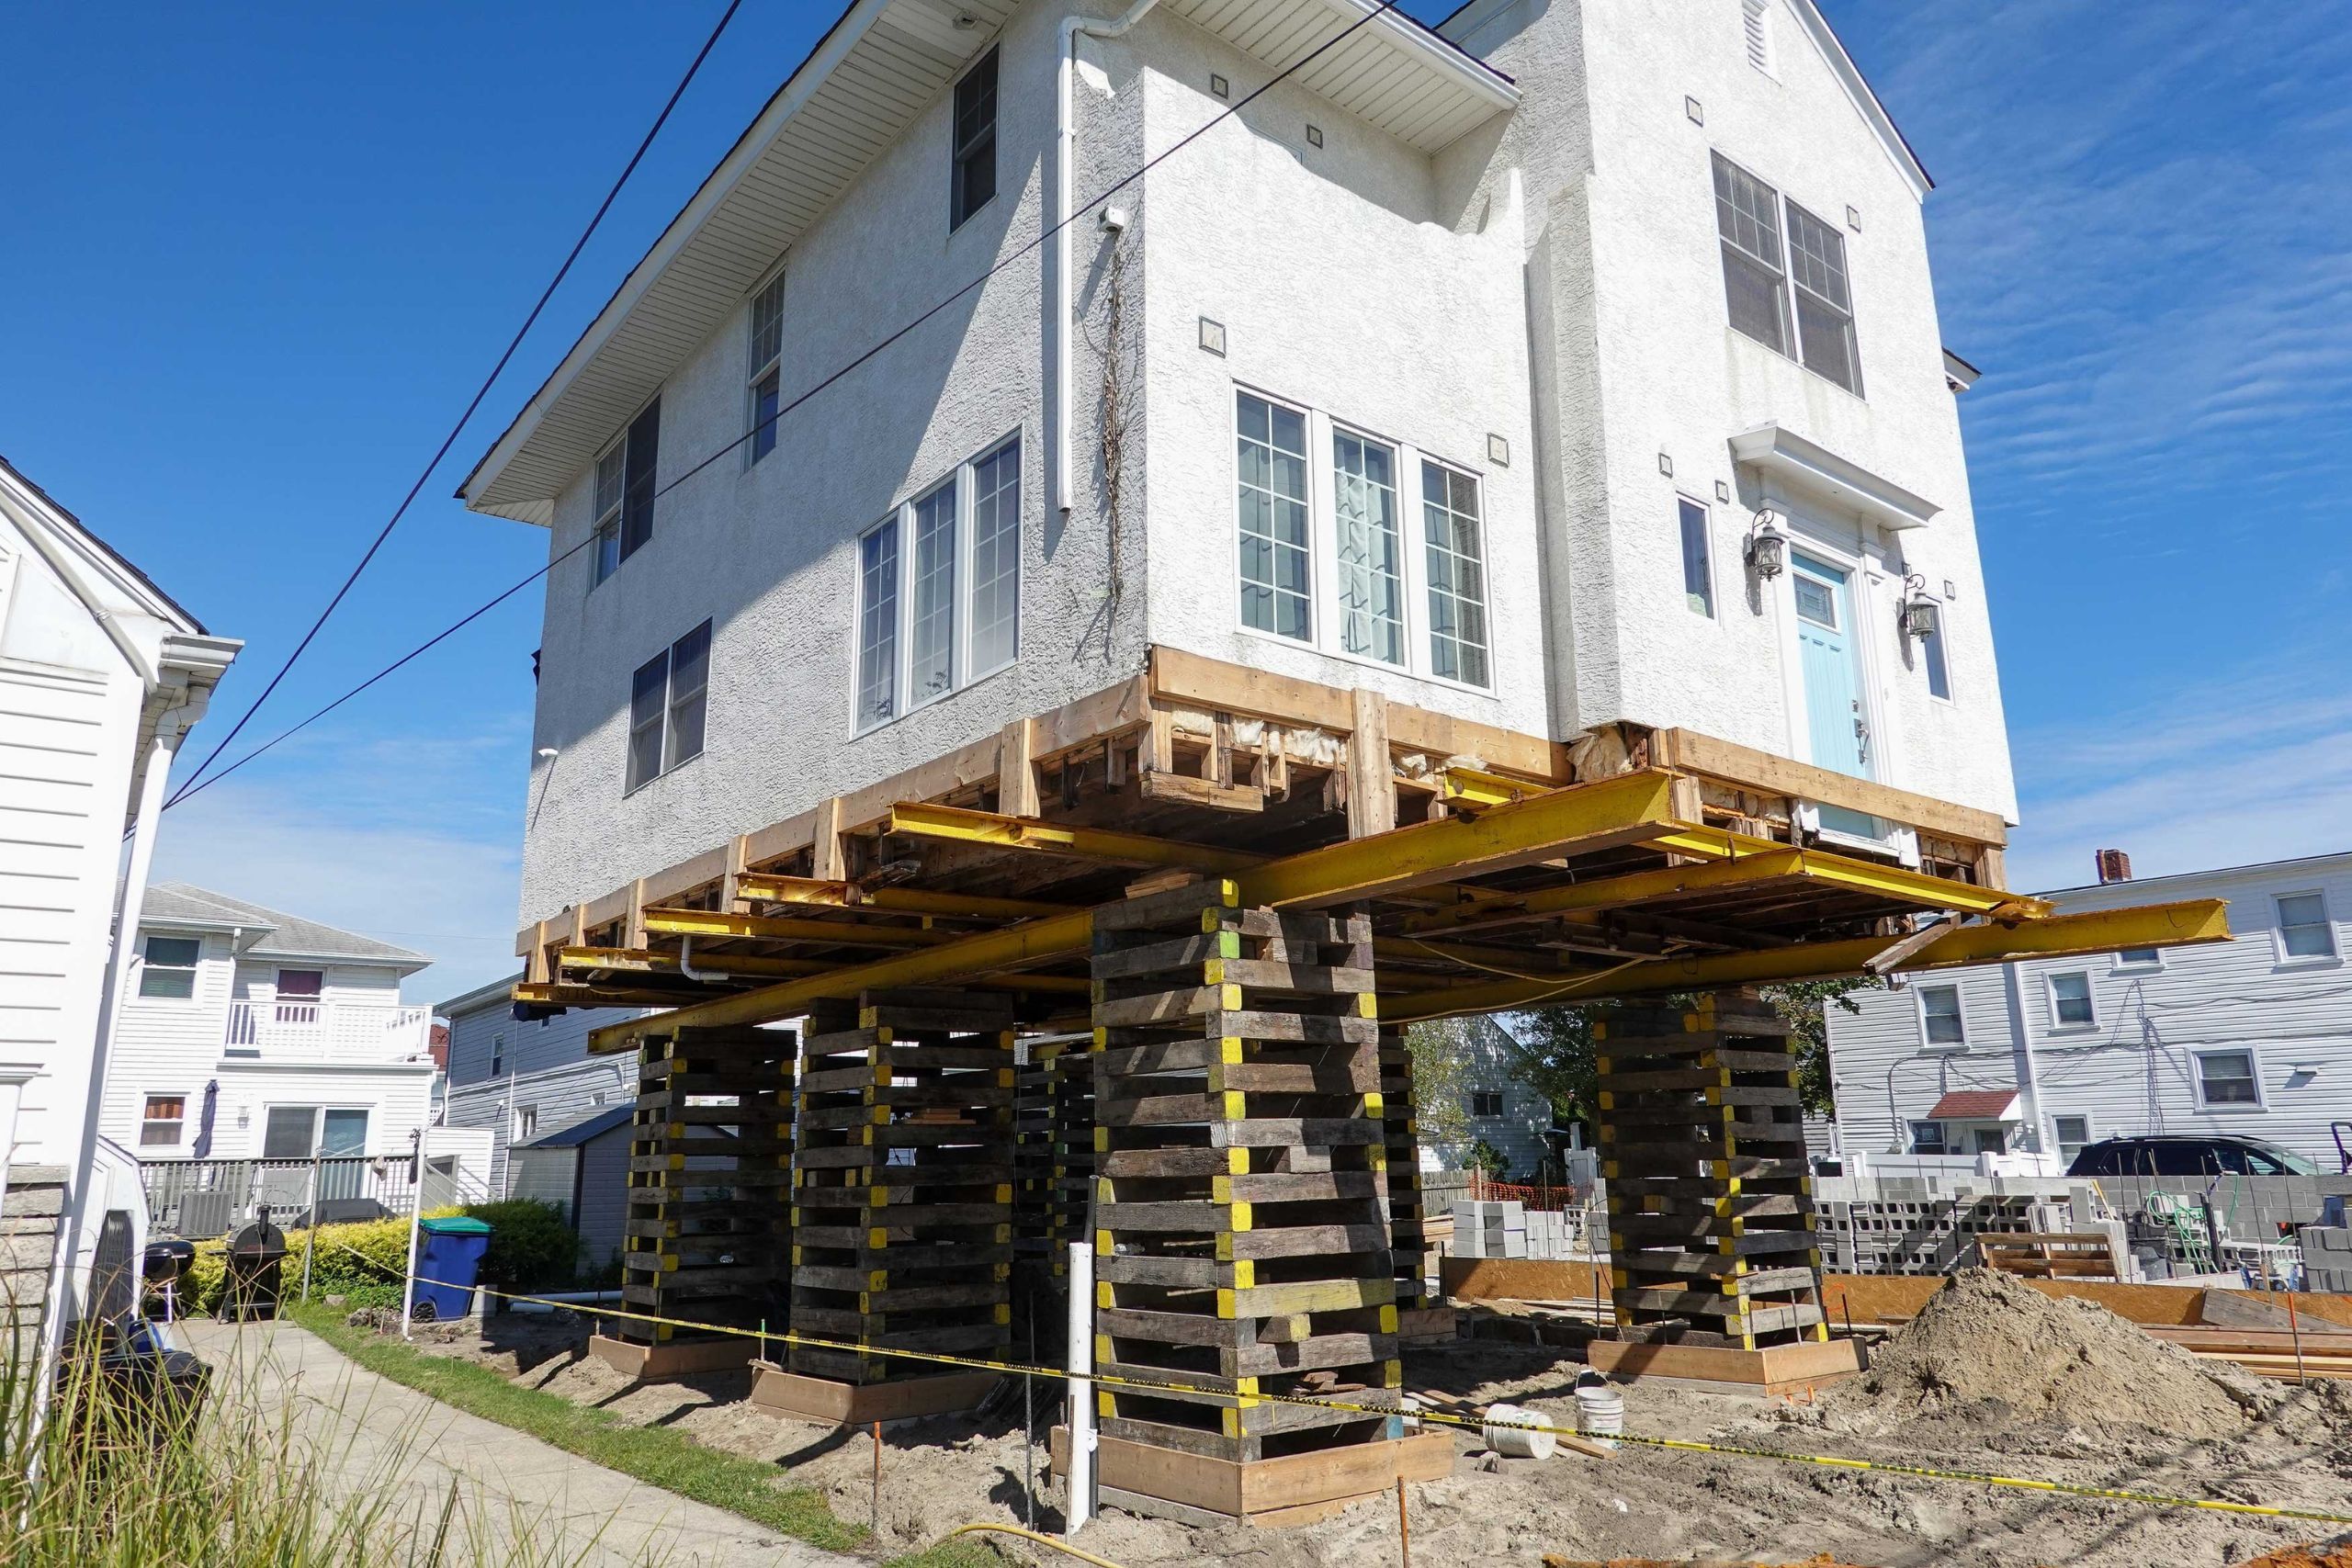 A team of professionals using specialized equipment to raise a house in South Florida, preparing it for elevation and renovation